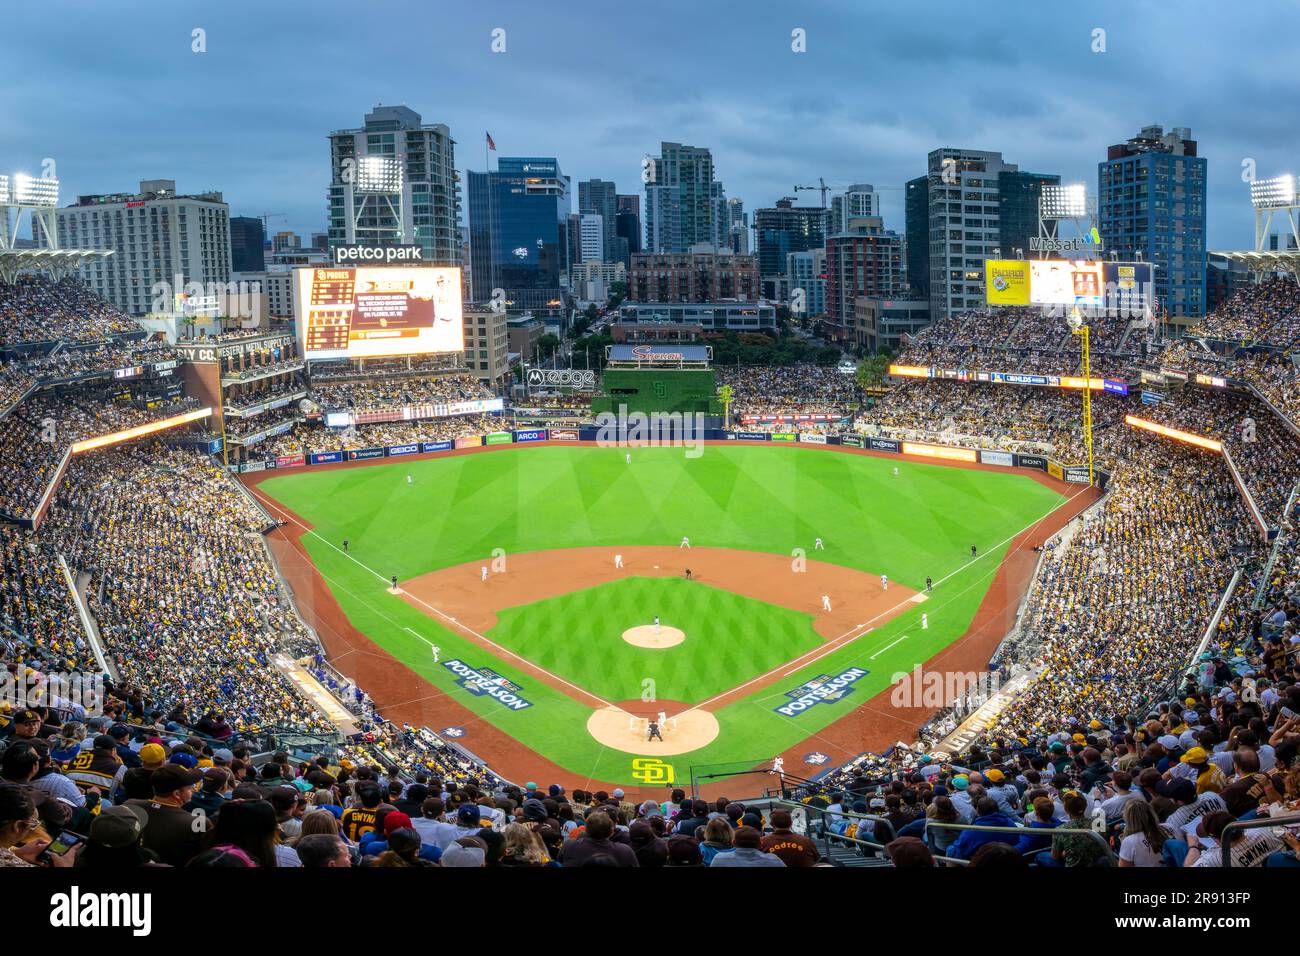 Petco Park, the baseball stadium home of the Major League team San Diego Padres, in downtown San Diego, California Stock Photo